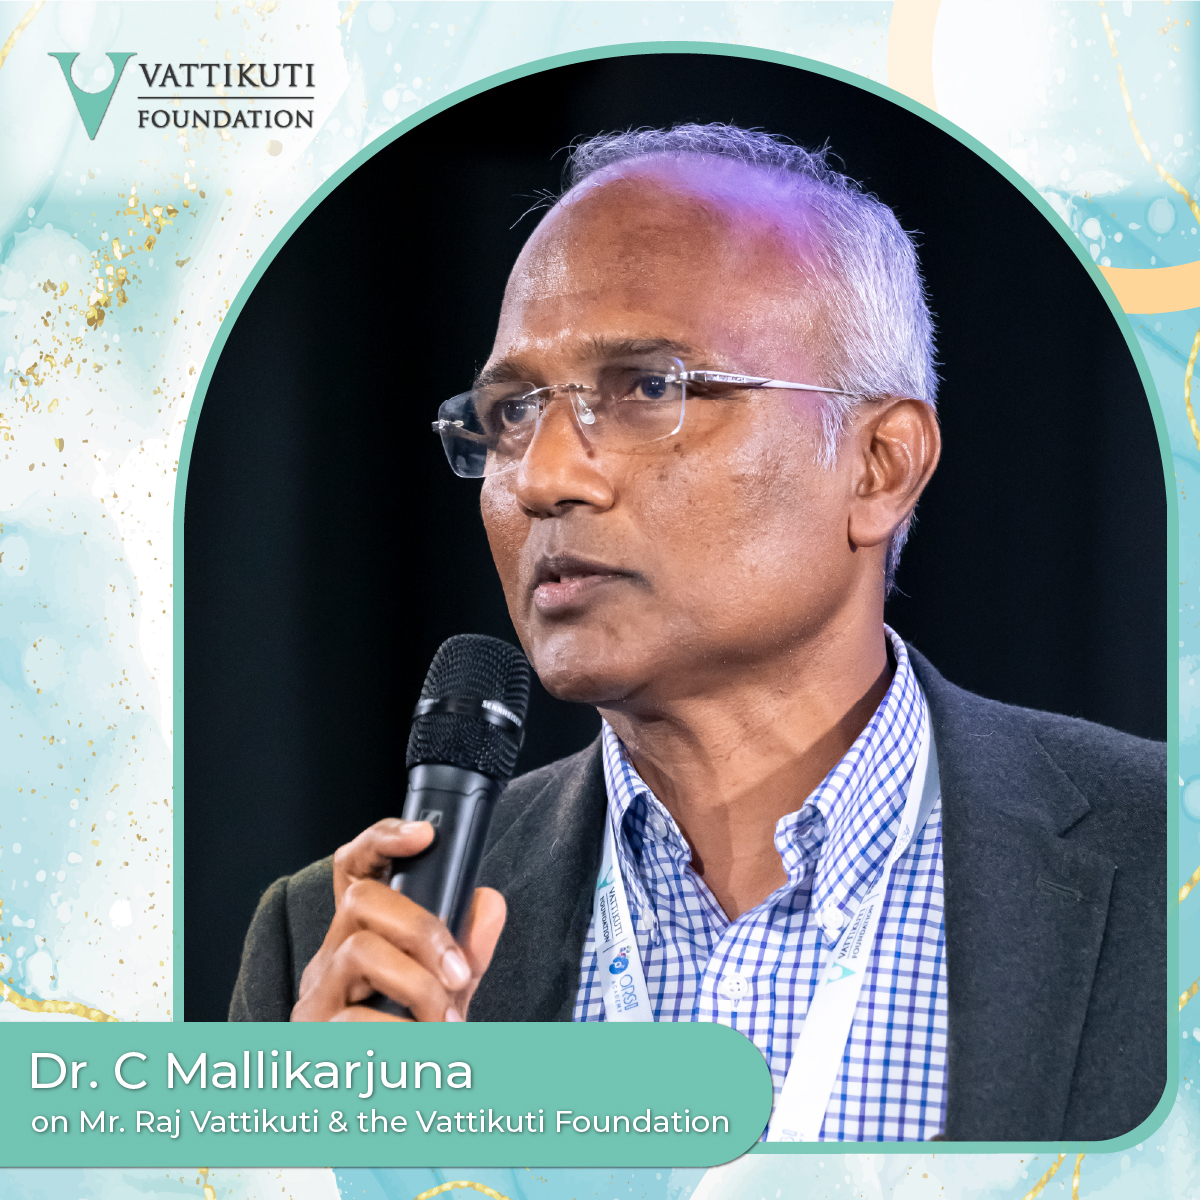 Managing Director of The Asian Institute of Nephrology and Urology in Hyderabad, Dr. Mallikarjuna Chiruvella recently spoke with the Vattikuti Foundation about President & Founder Raj Vattikuti. Hear his concerted efforts to make advancements in robotic surgery sustainable.